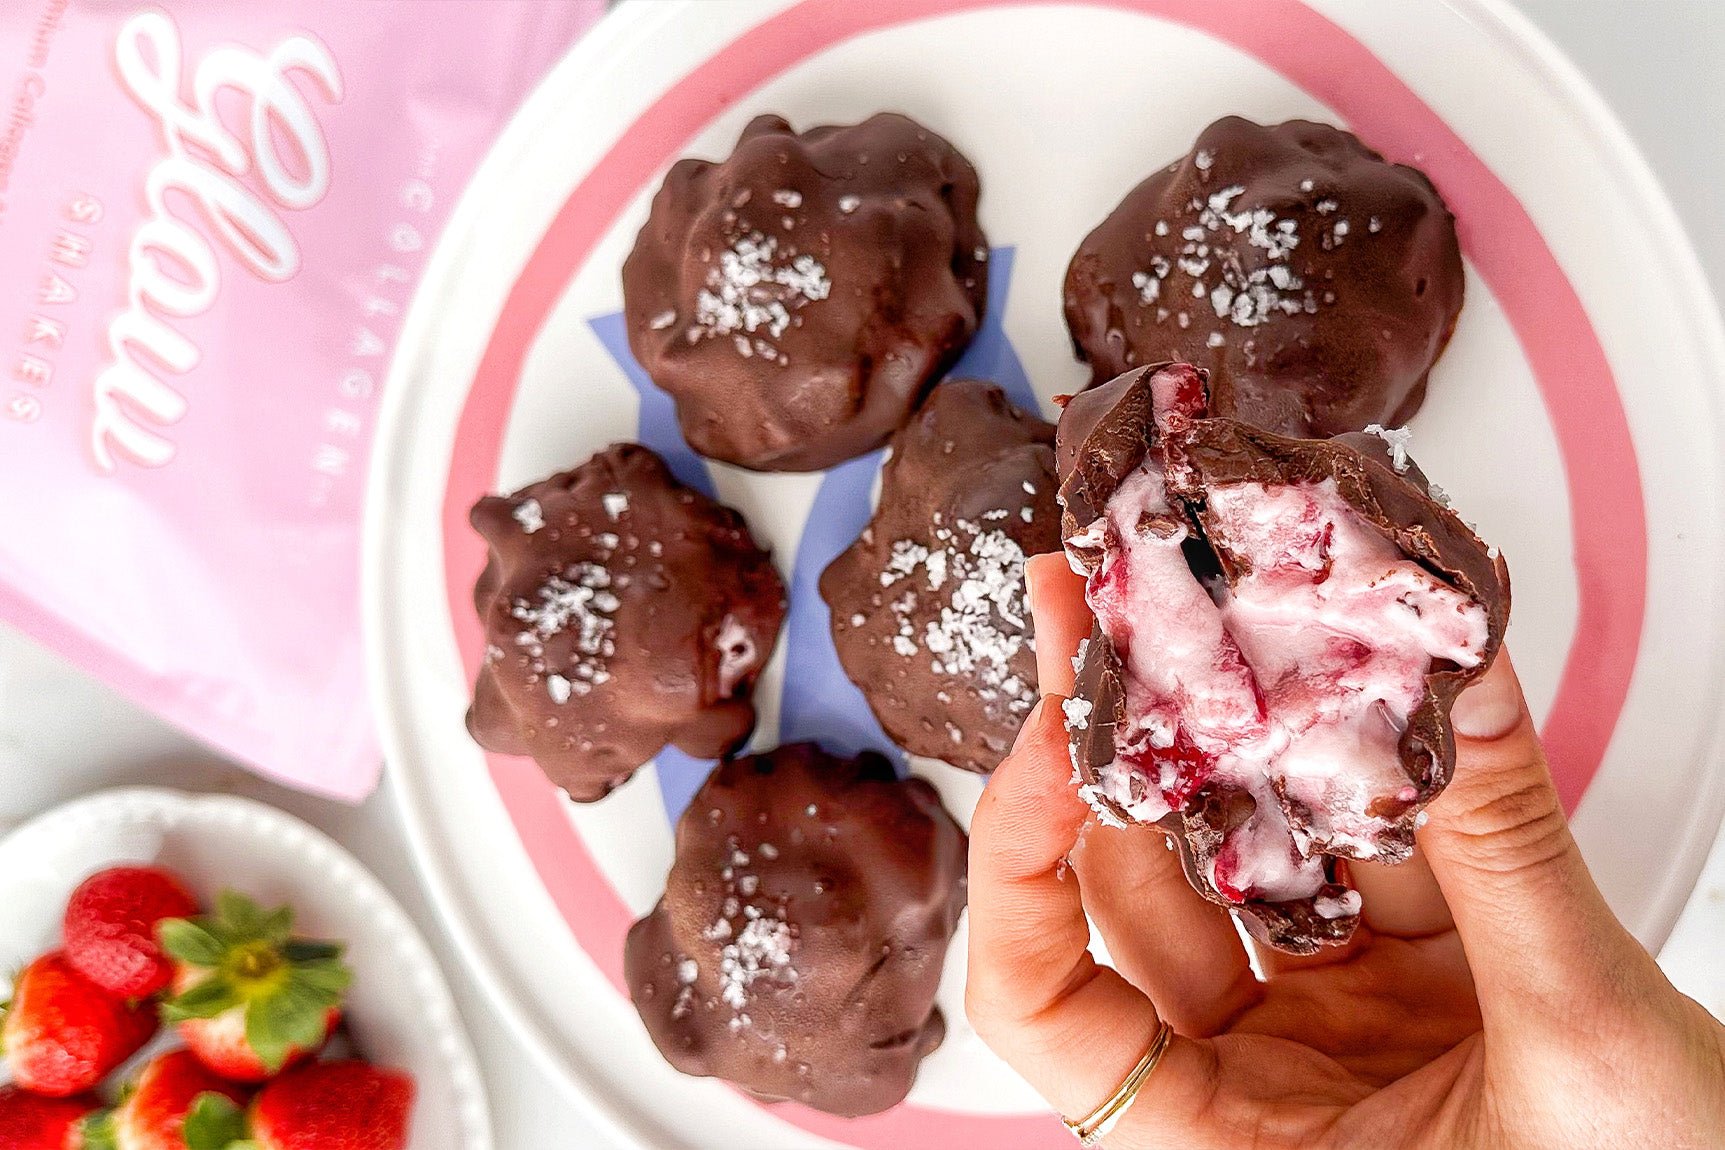 Choc-Strawberry Yoghurt Clusters - The Collagen Co.